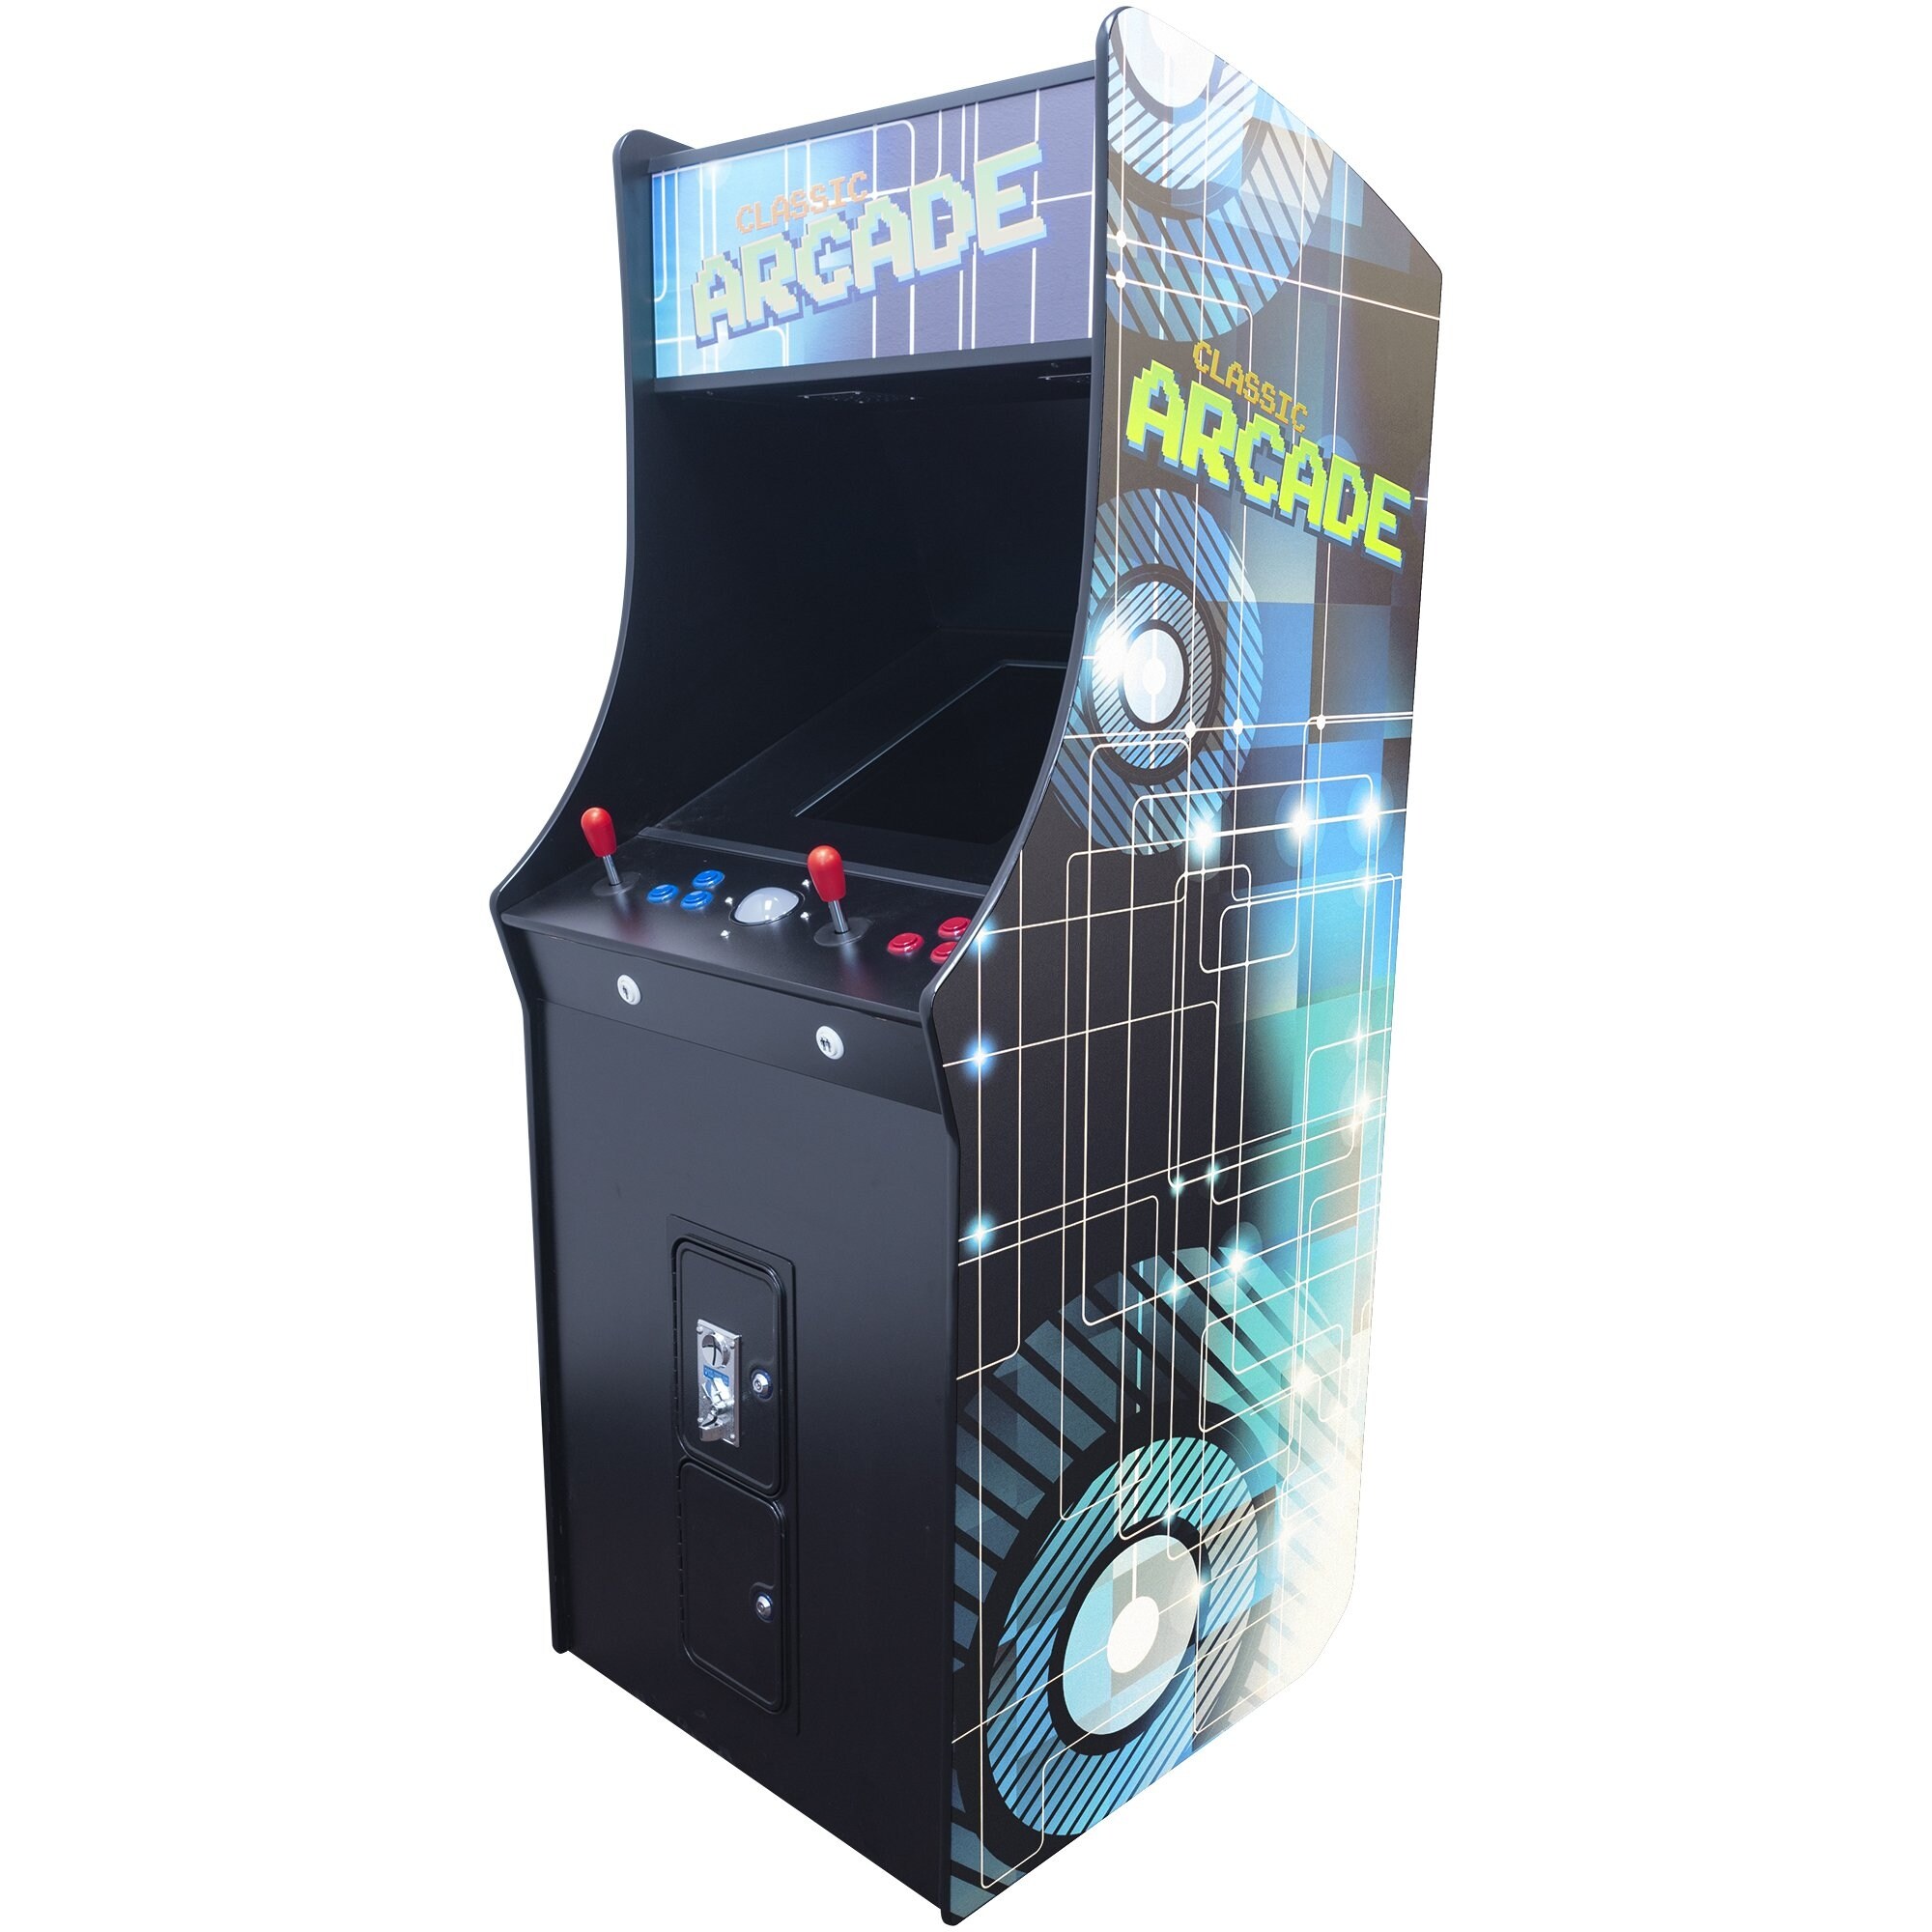 Creative Arcades Full-Size Commercial Grade Stand Up Arcade Machine with 60 Classic Video Games, 22-Inch LCD Screen - 2 Player